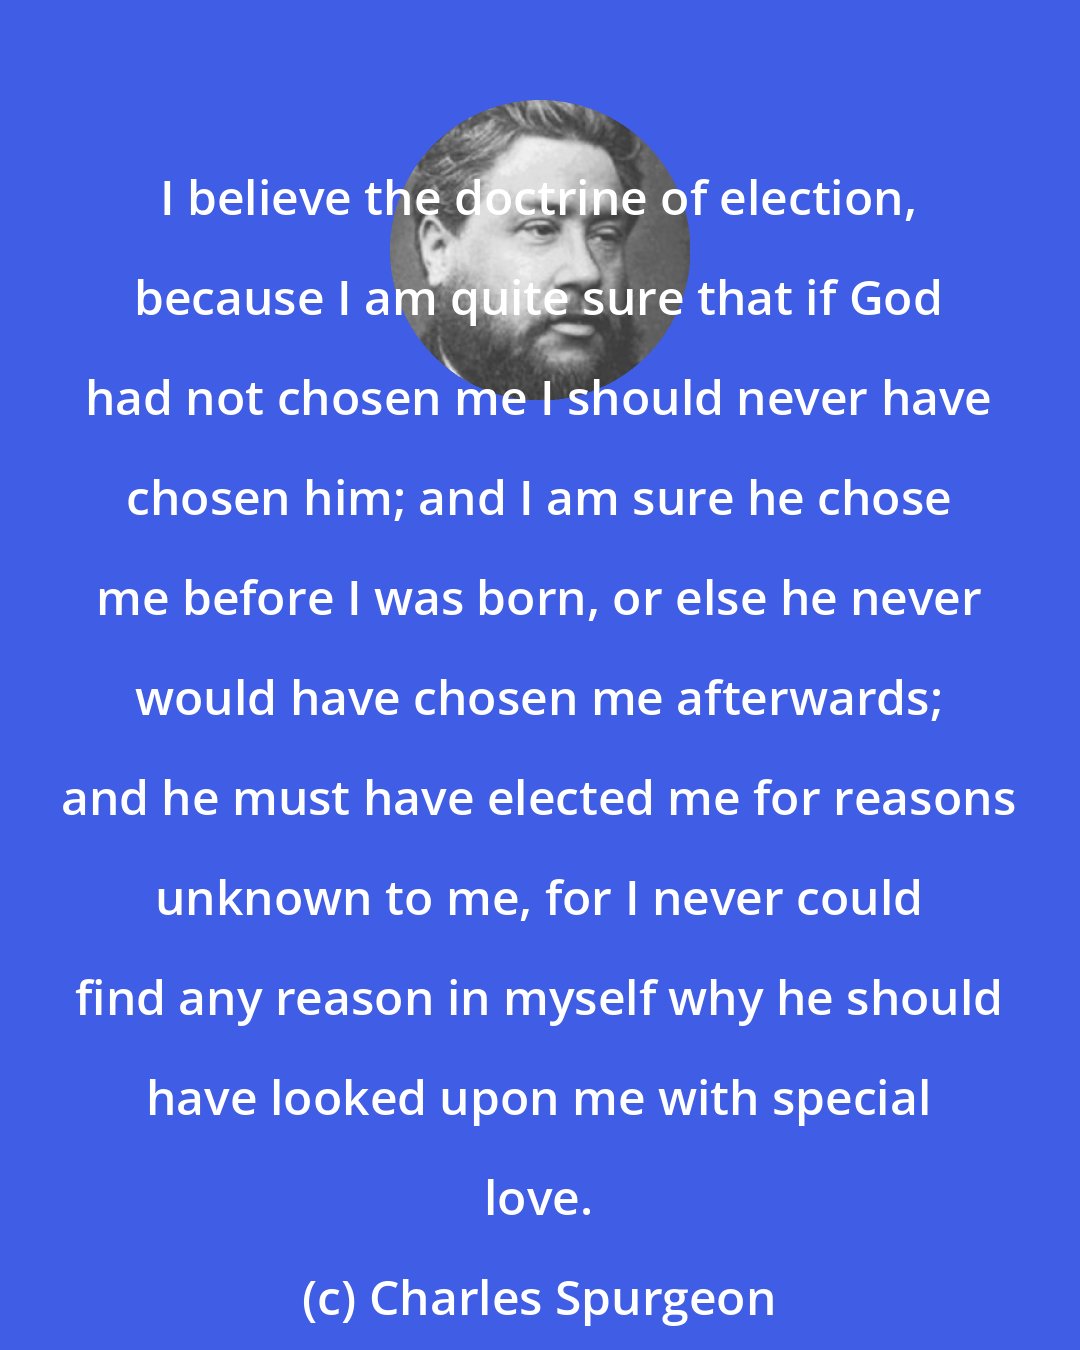 Charles Spurgeon: I believe the doctrine of election, because I am quite sure that if God had not chosen me I should never have chosen him; and I am sure he chose me before I was born, or else he never would have chosen me afterwards; and he must have elected me for reasons unknown to me, for I never could find any reason in myself why he should have looked upon me with special love.